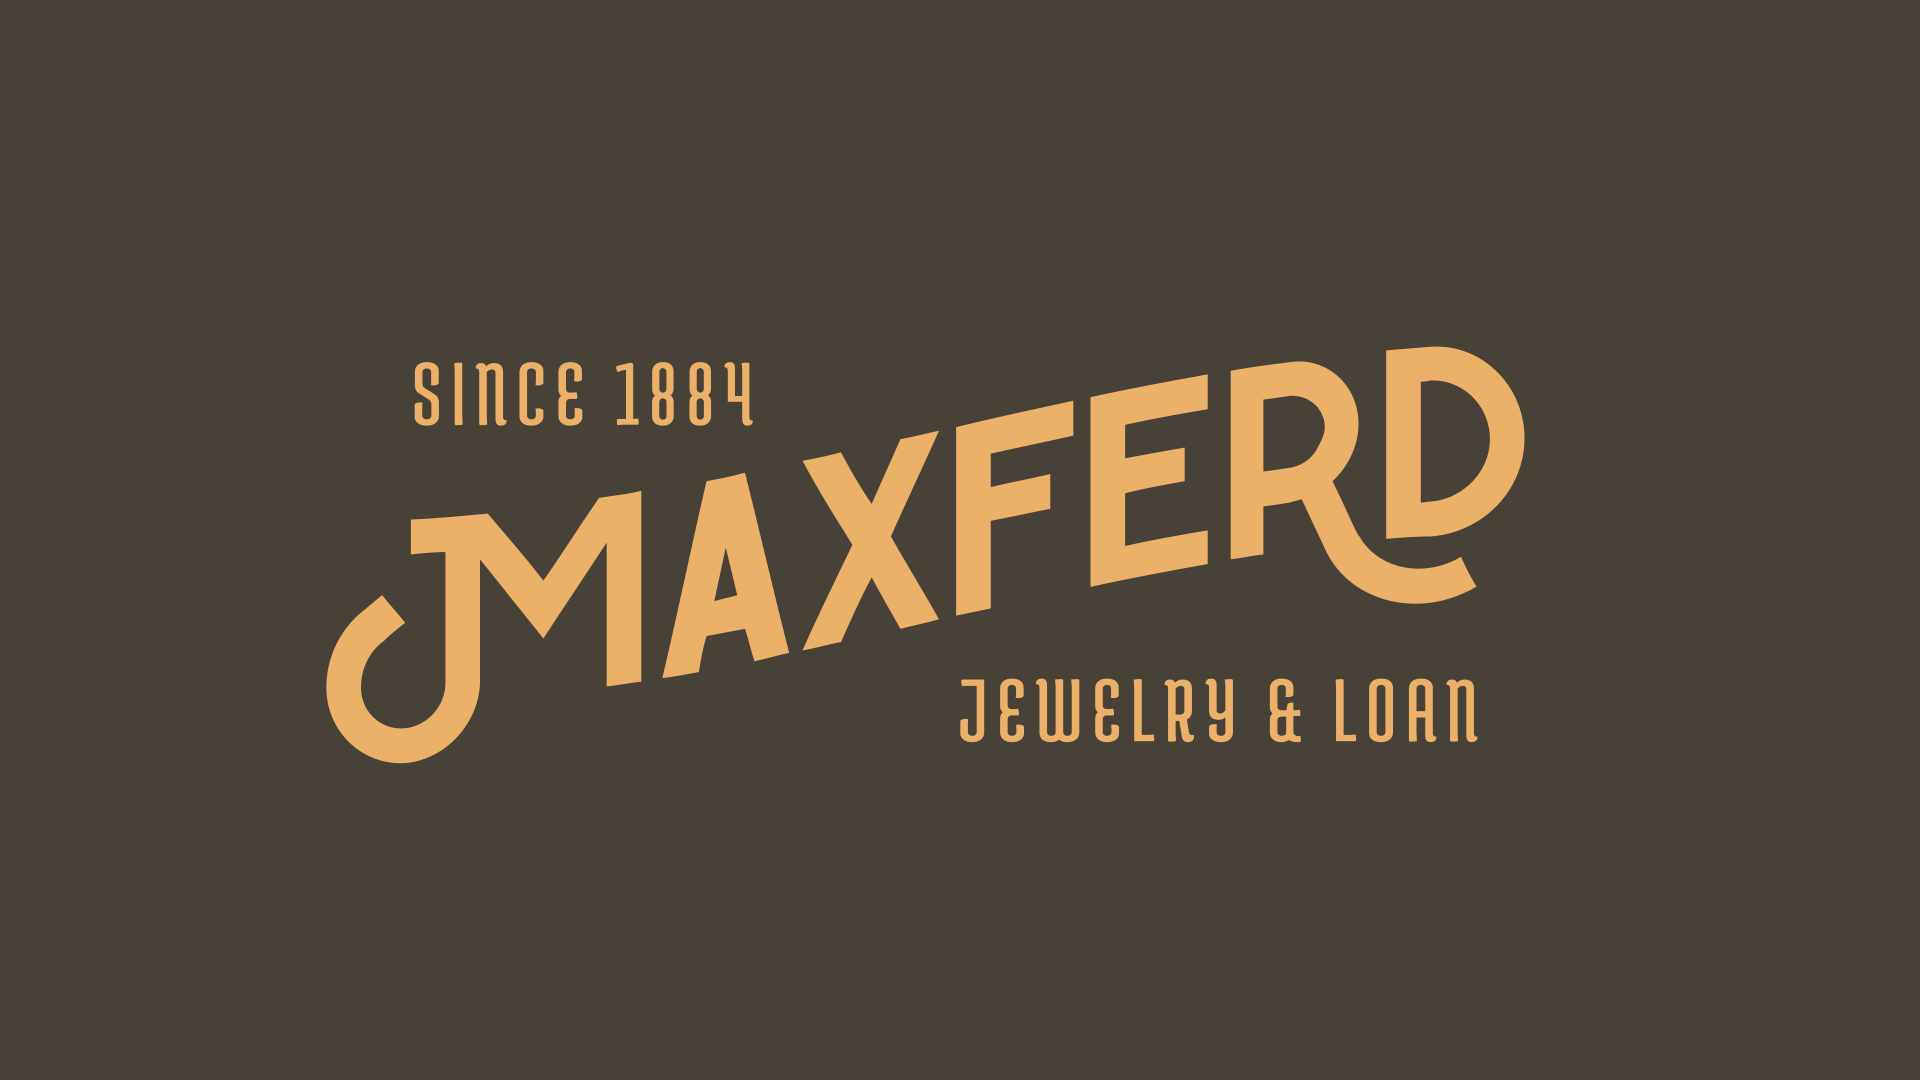 Maxferd Jewelry & Loan's Latest Blog Post Highlights Top 5 Reasons to Buy Jewelry From Pawn Shops